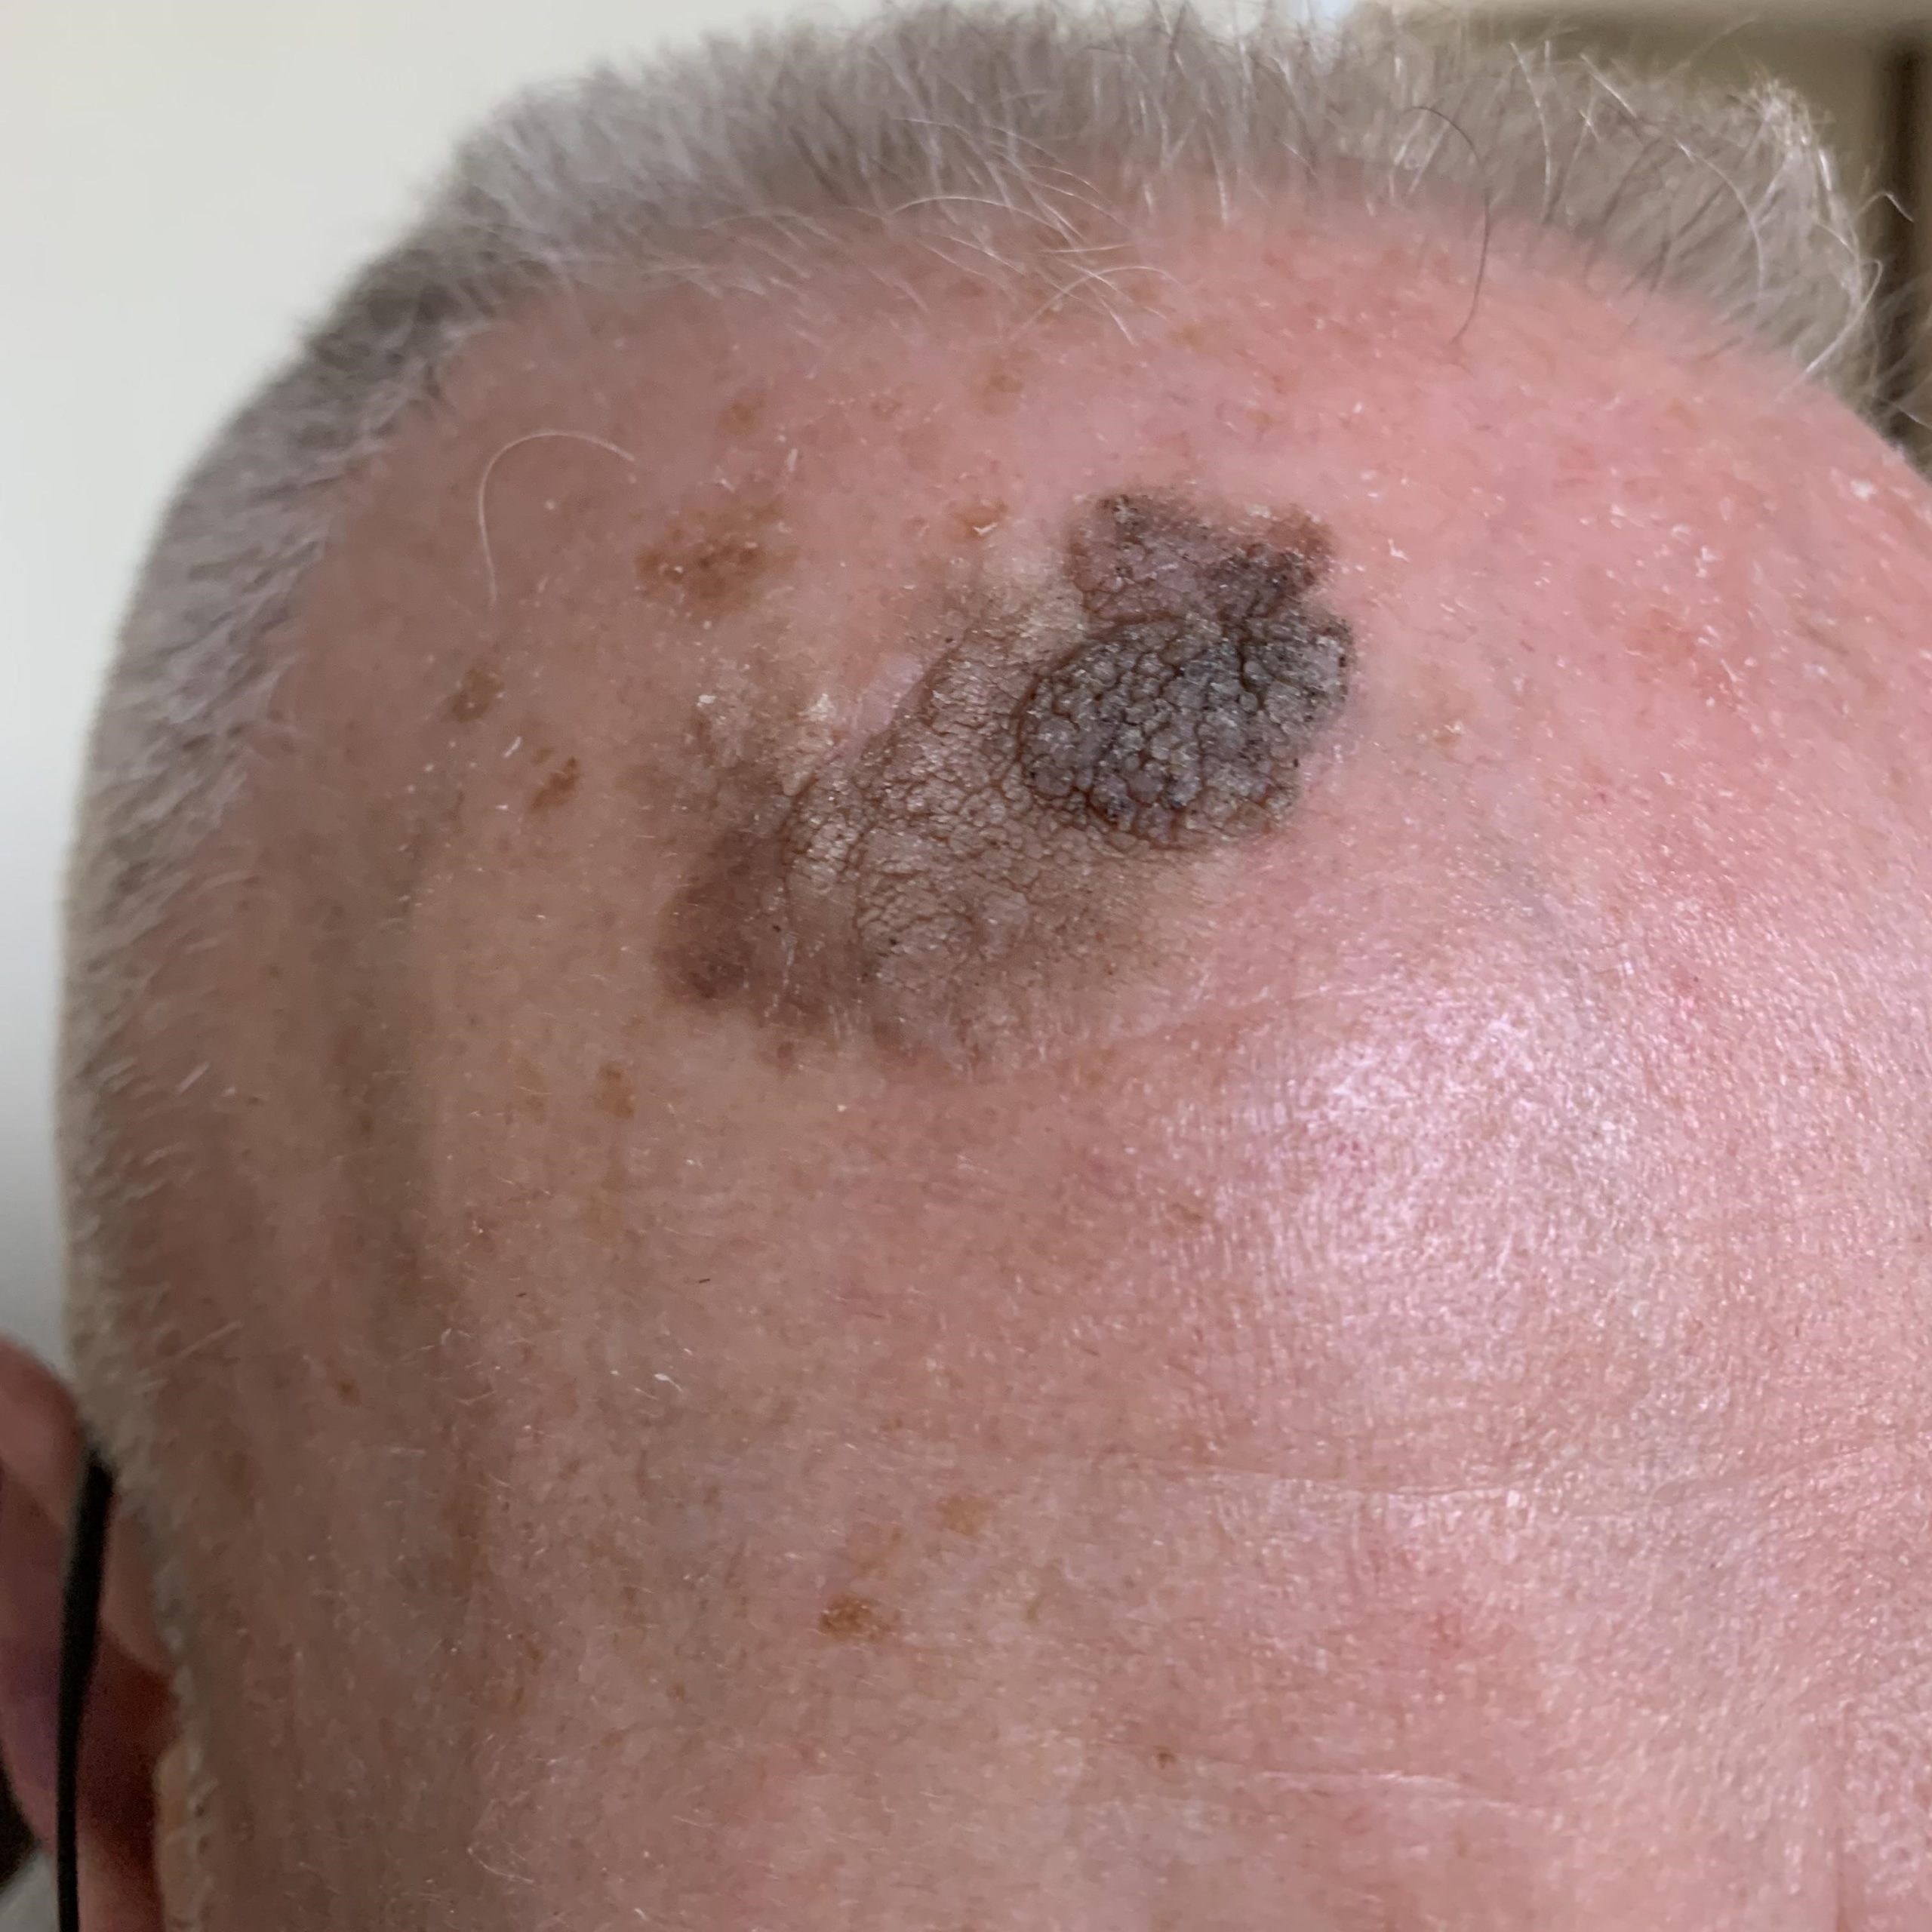 3 weeks post Keratosis removal performed by Dr Javier Montero at our Christchurch Family Medical Practice.